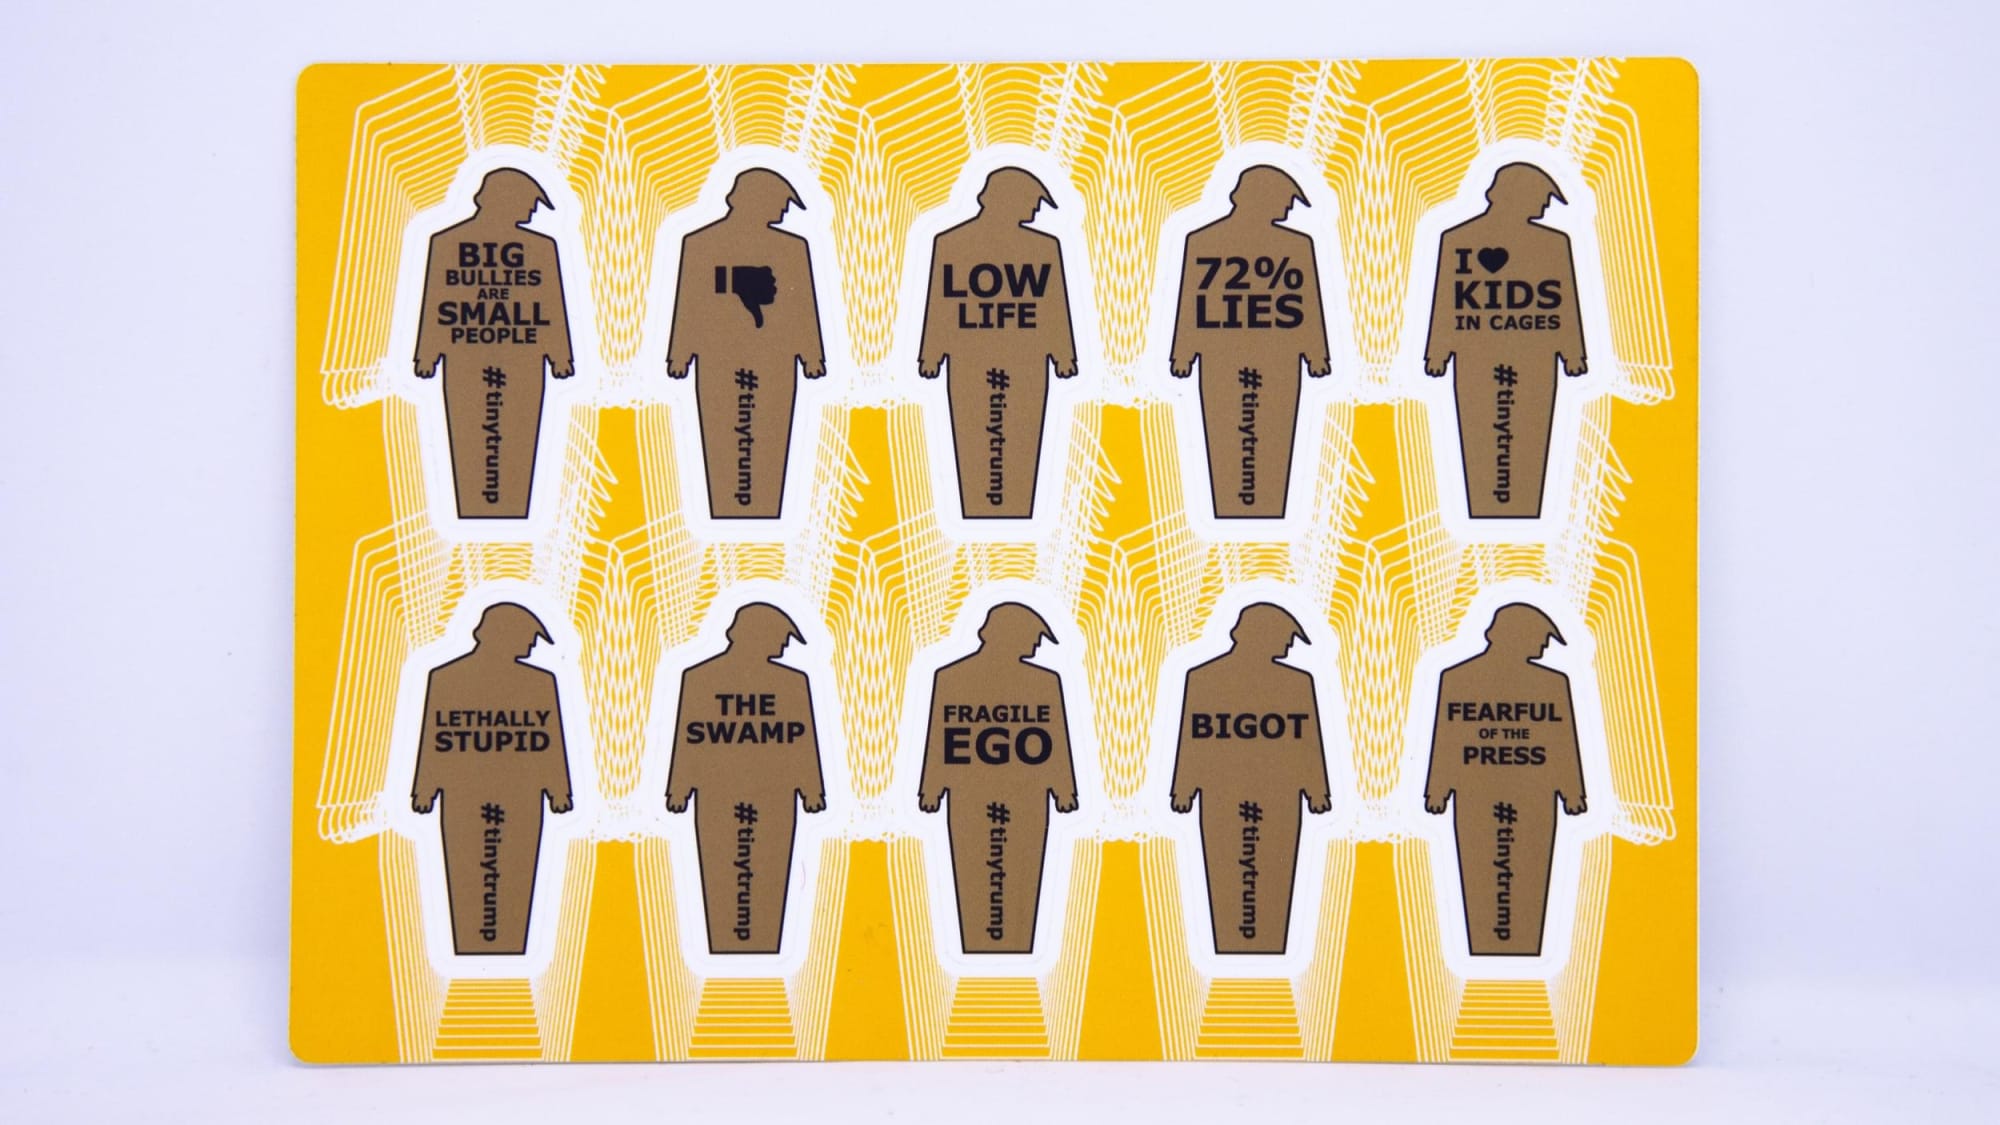 Small thumbnail image of Product photograph of a 4 inch by 6 inch sticker sheet consisting of a yellow background and 12 individual tiny trumps with the following slogans: Big Bullies Are Small People, Thumbs Down, Low Life, 72% Lies, I love kids in cages, Lethally Stupid, The Swamp, Fragile Ego, Bigot, Fearful of the Press